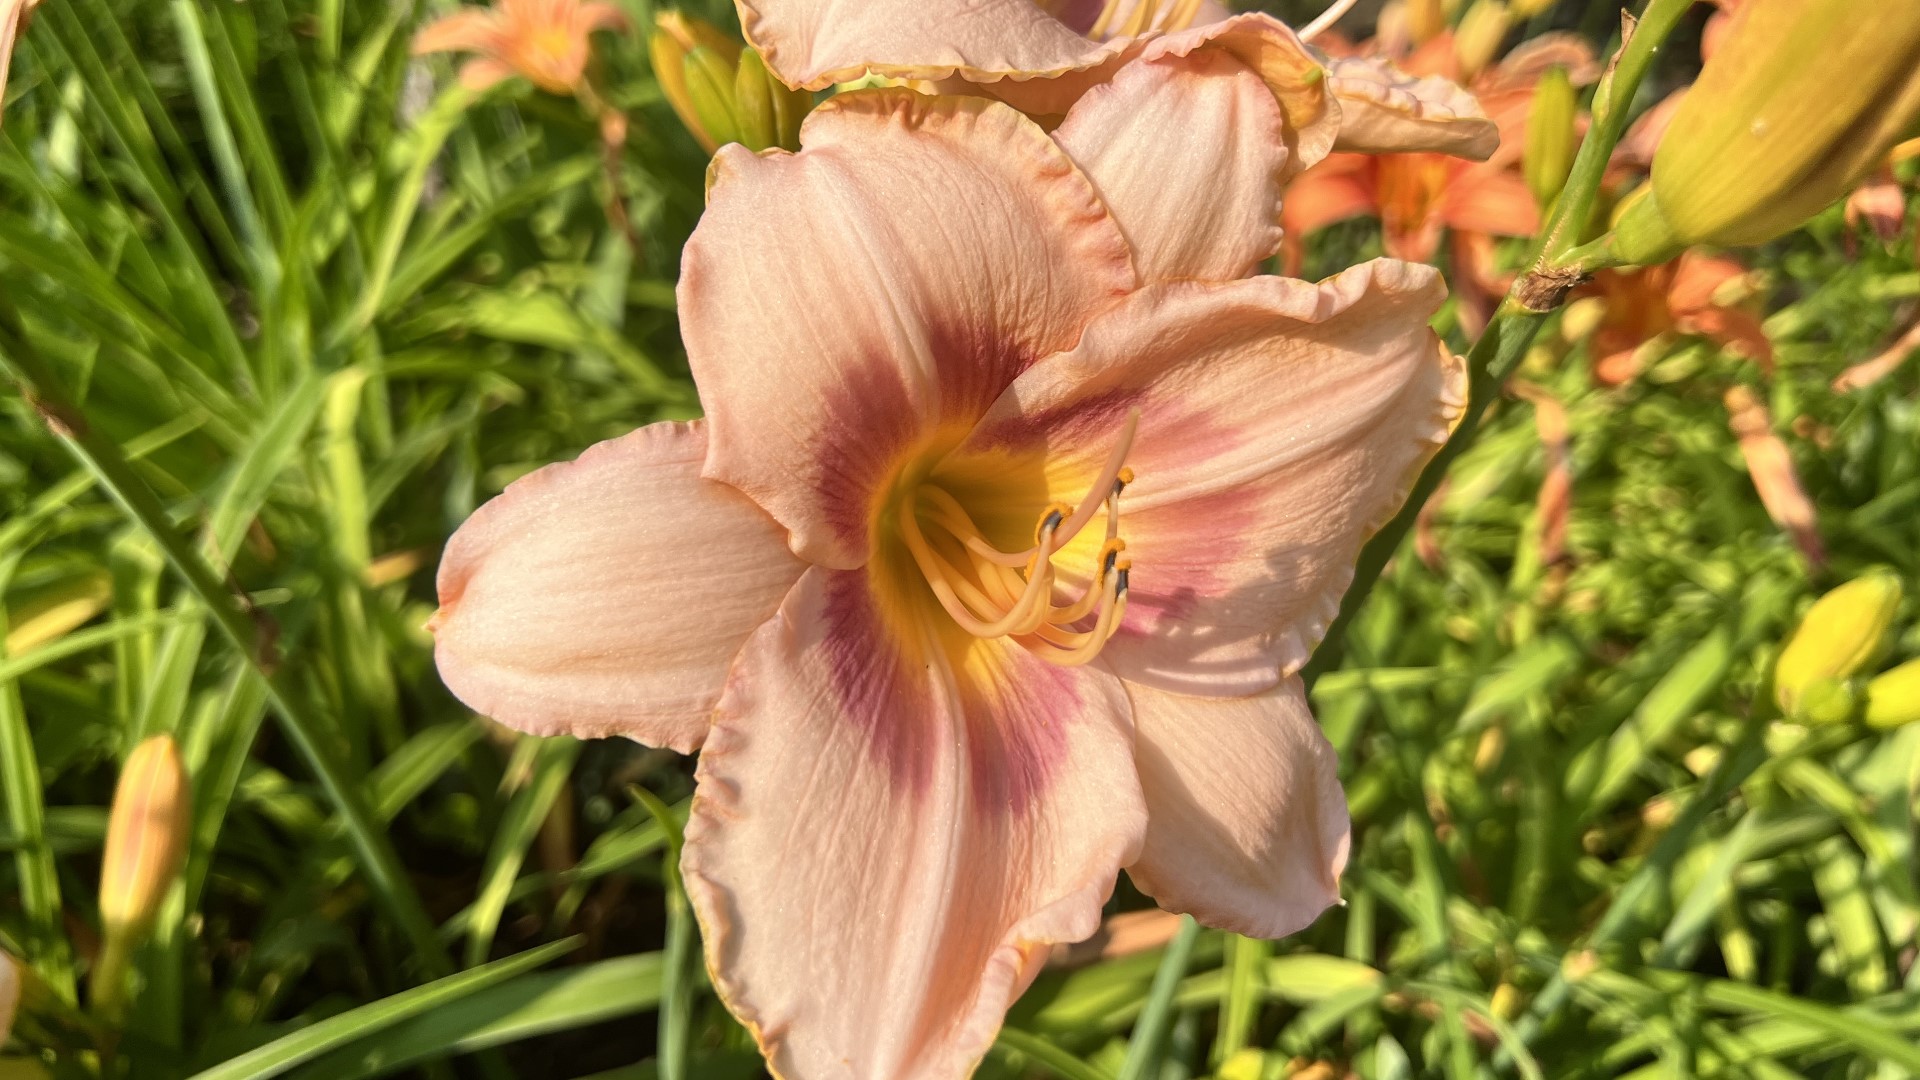 Gardening with Gutner learns how to take care of and split daylilies from expert Tina White who owns a National Daylily Society Display Garden in Jefferson, Maine.